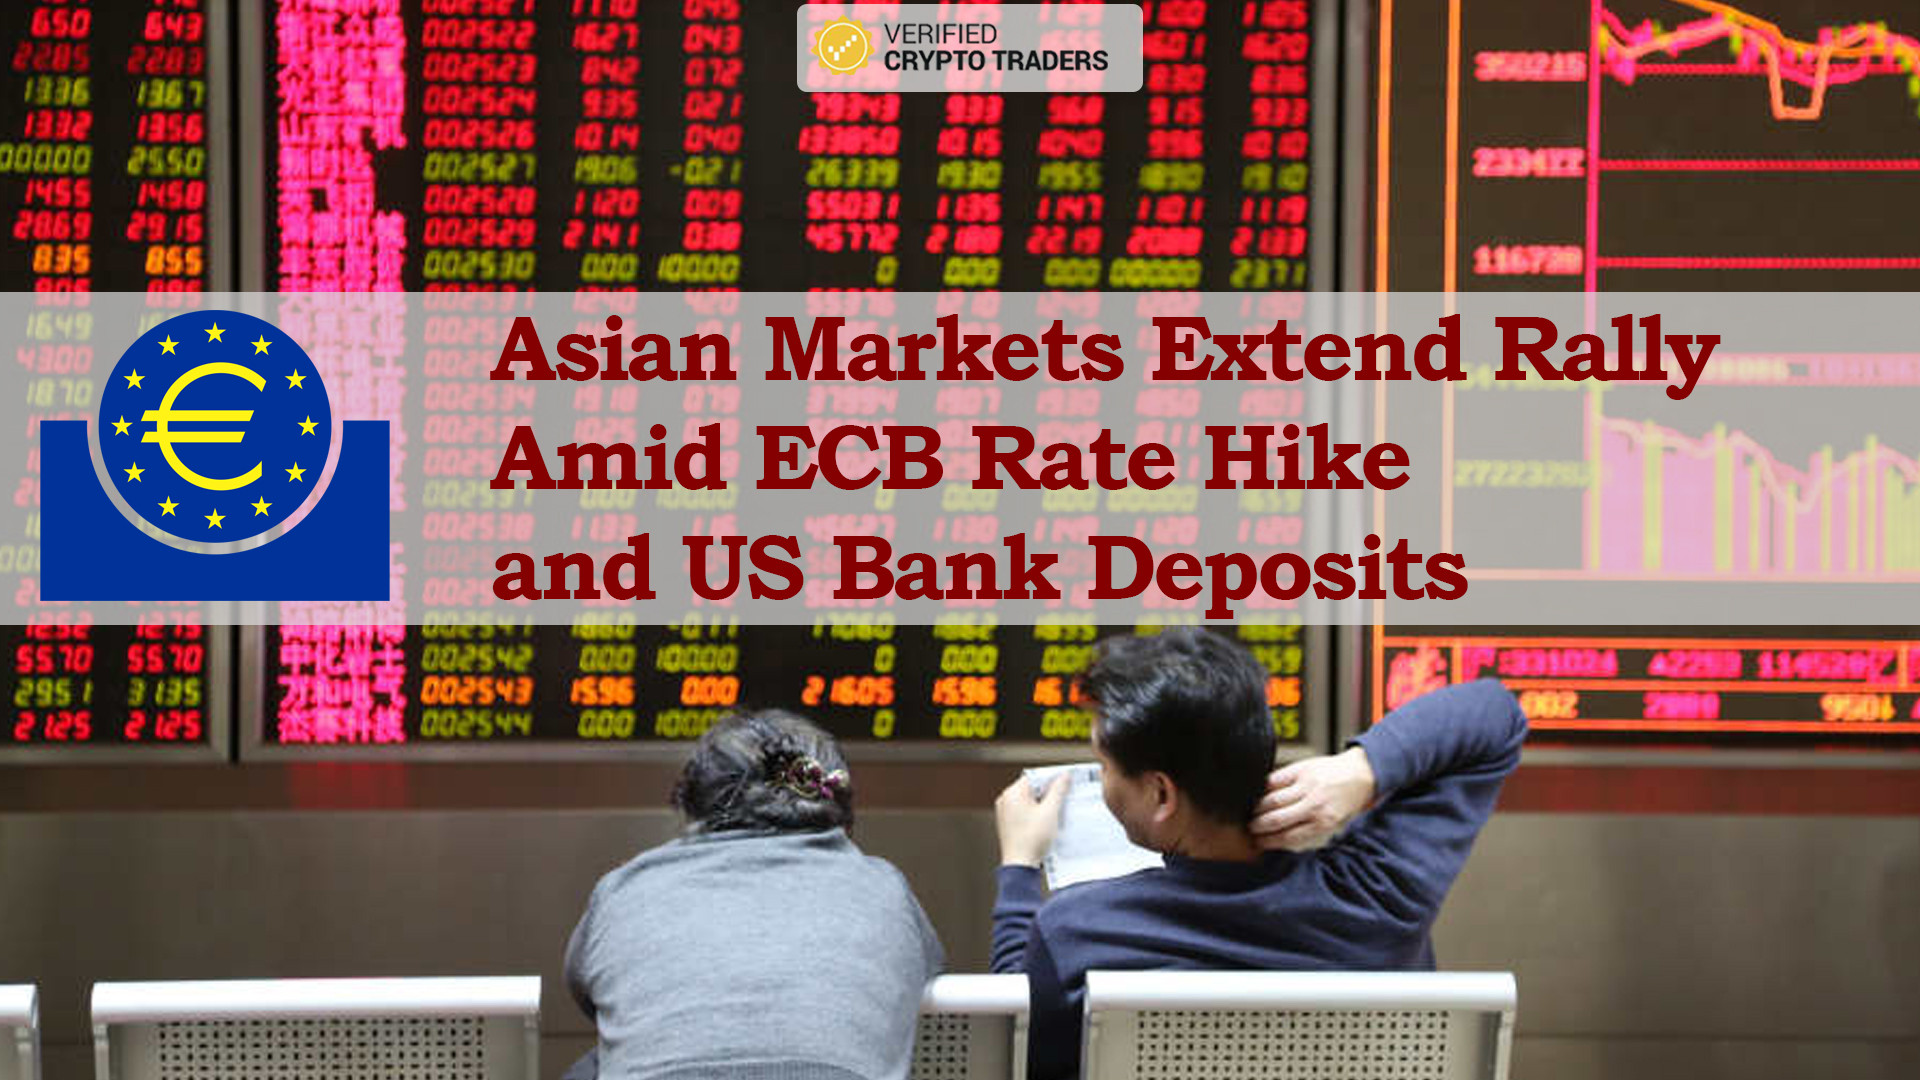 Asian Markets Extend Risk Rally as ECB Raises Rates and US Banks Deposit Billions